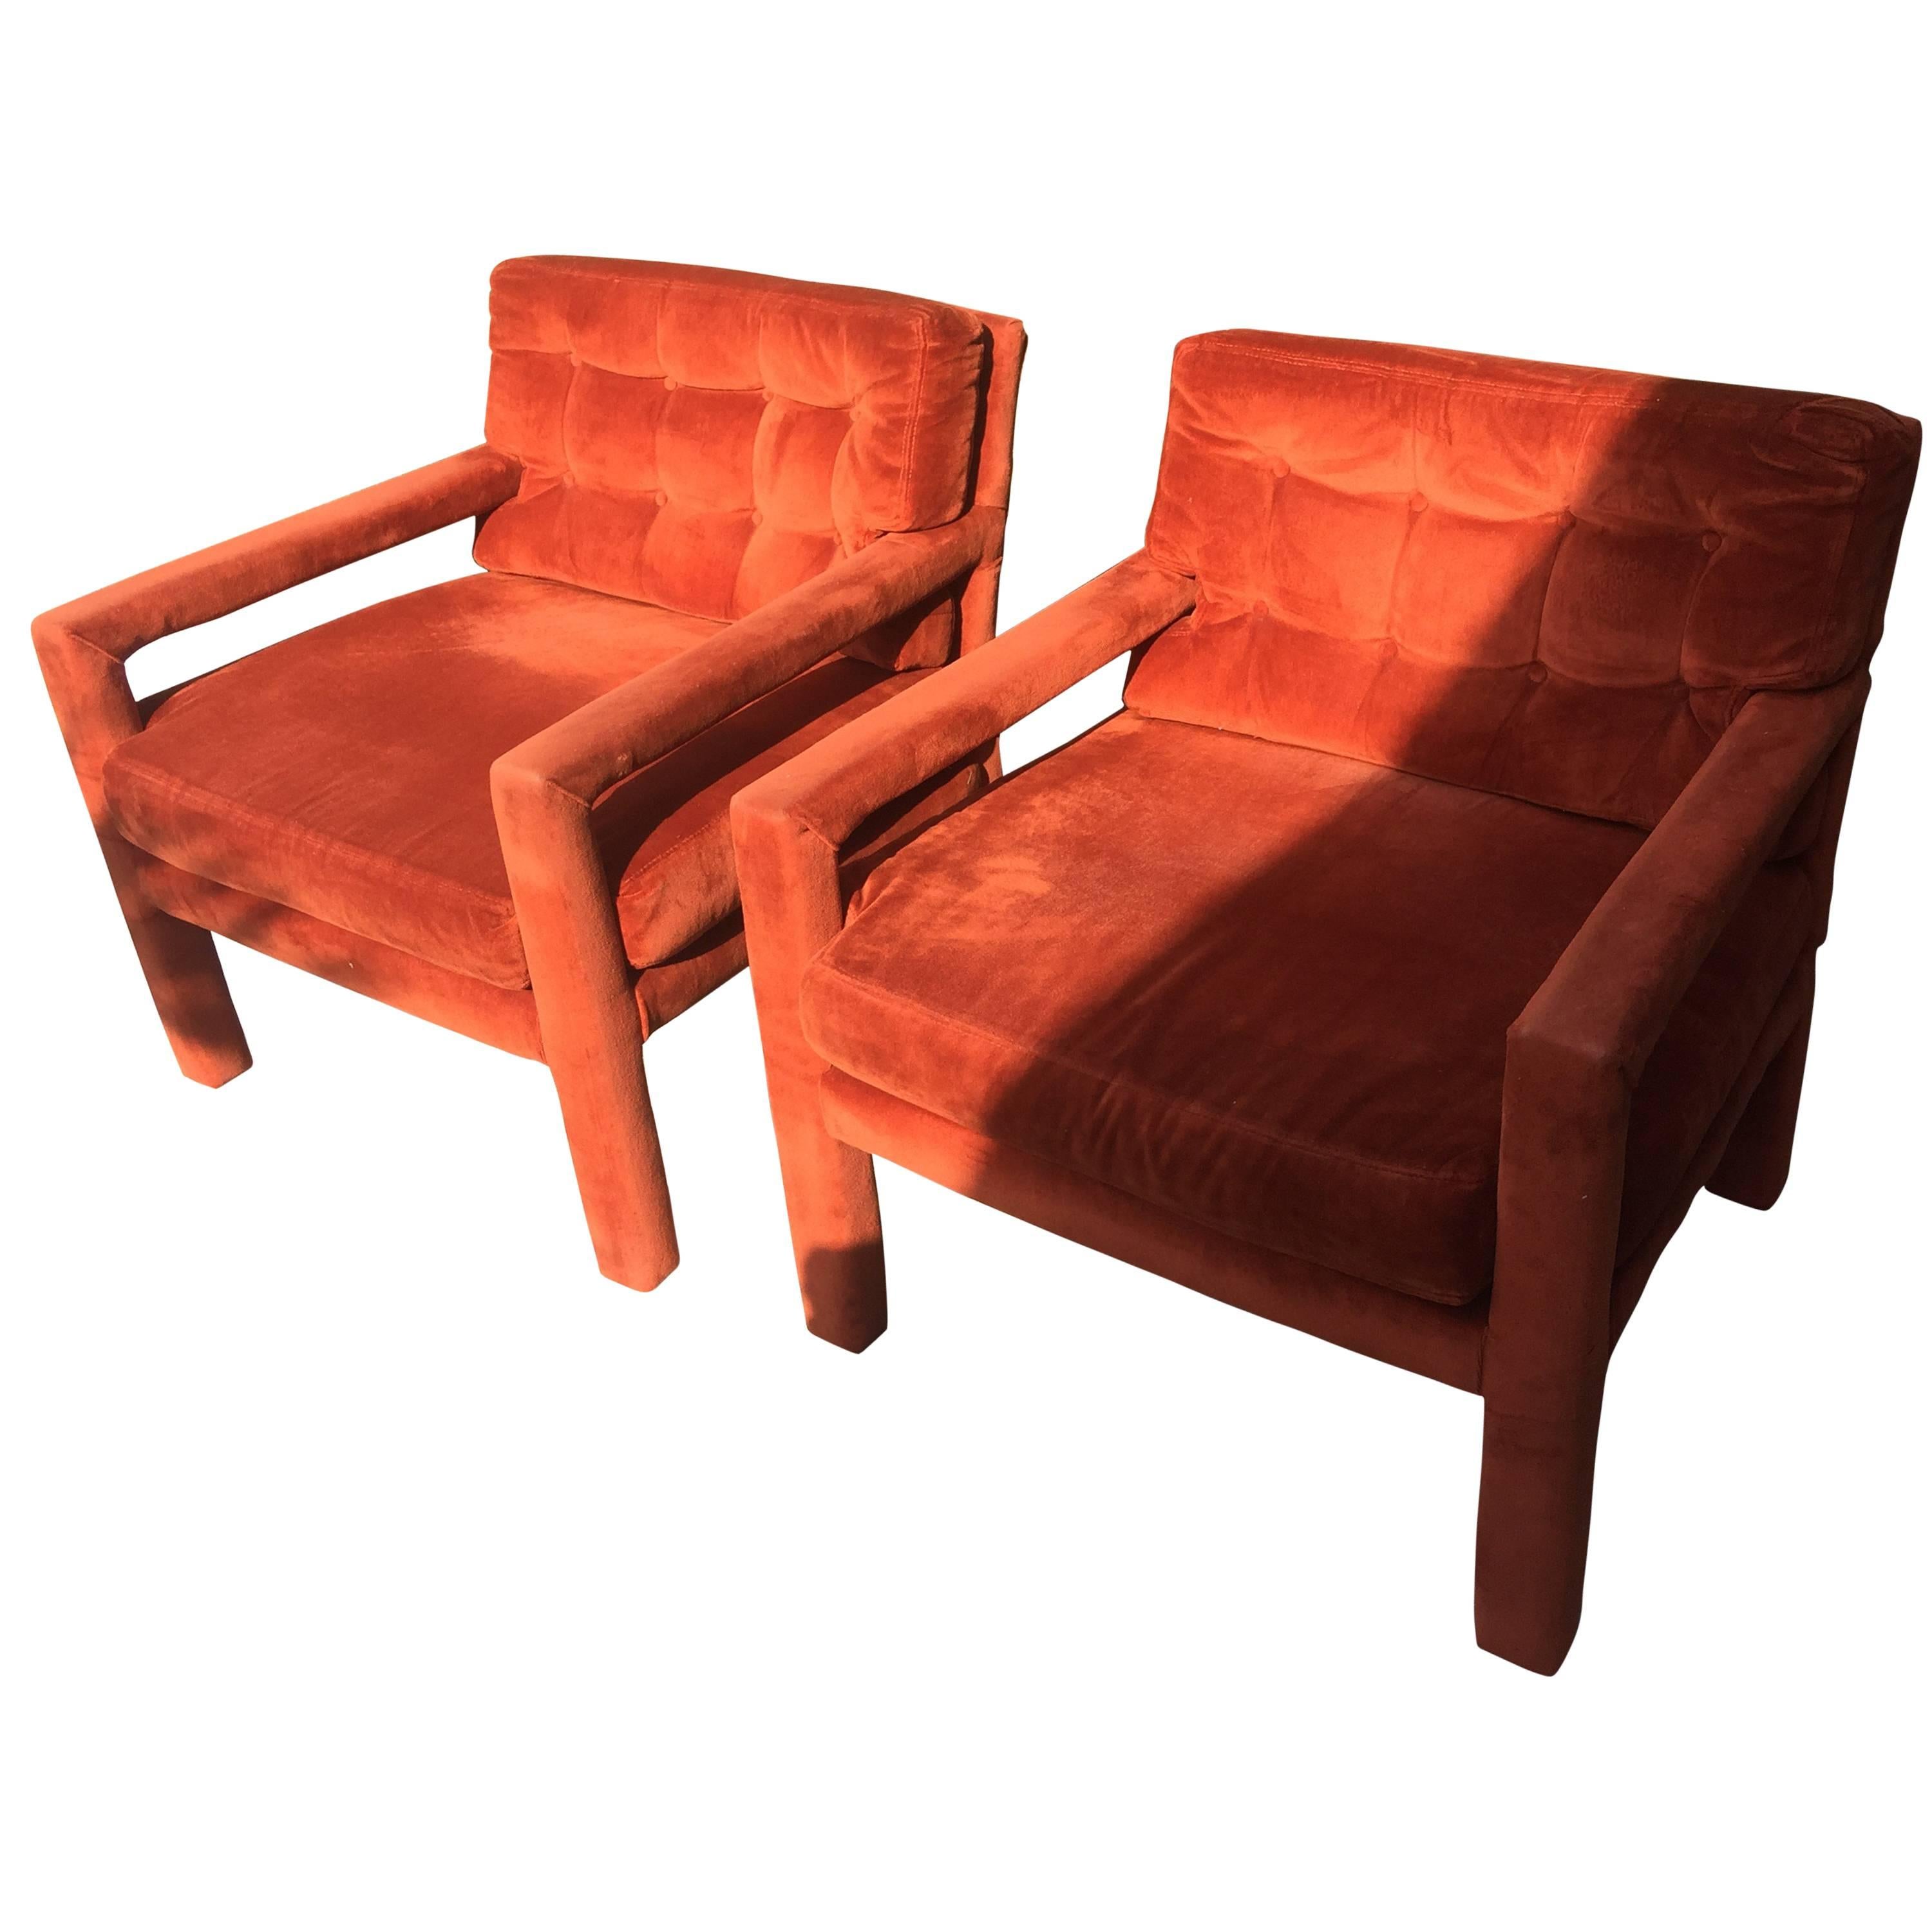 Pair of Milo Baughman Tufted Mid-Century Modern Parsons Armchairs Chairs